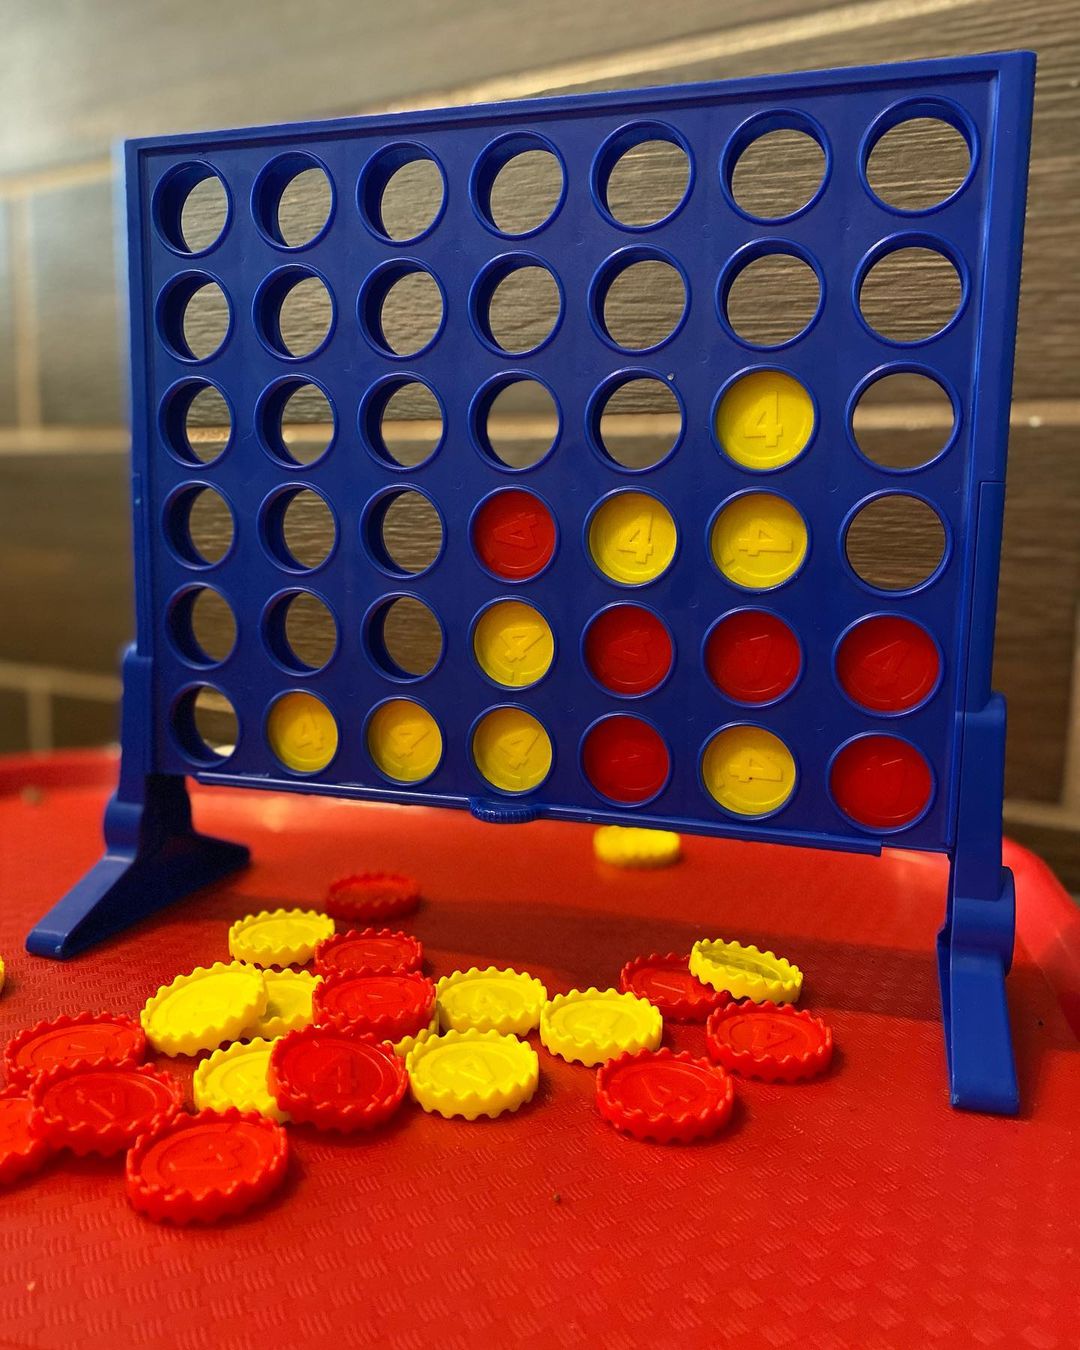 Connect 4 board game